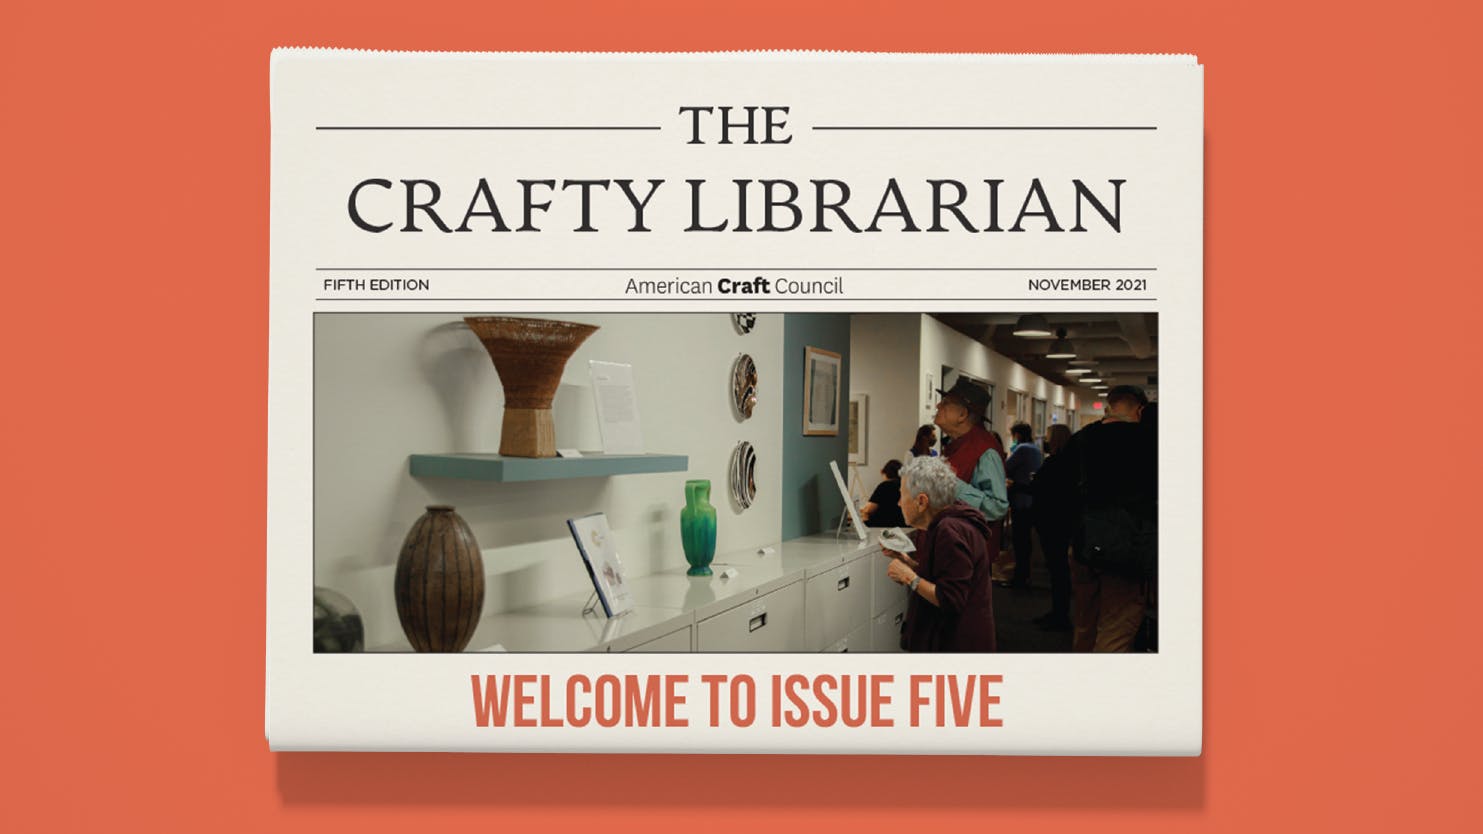 The Crafty Librarian Issue 05 Fall 2021